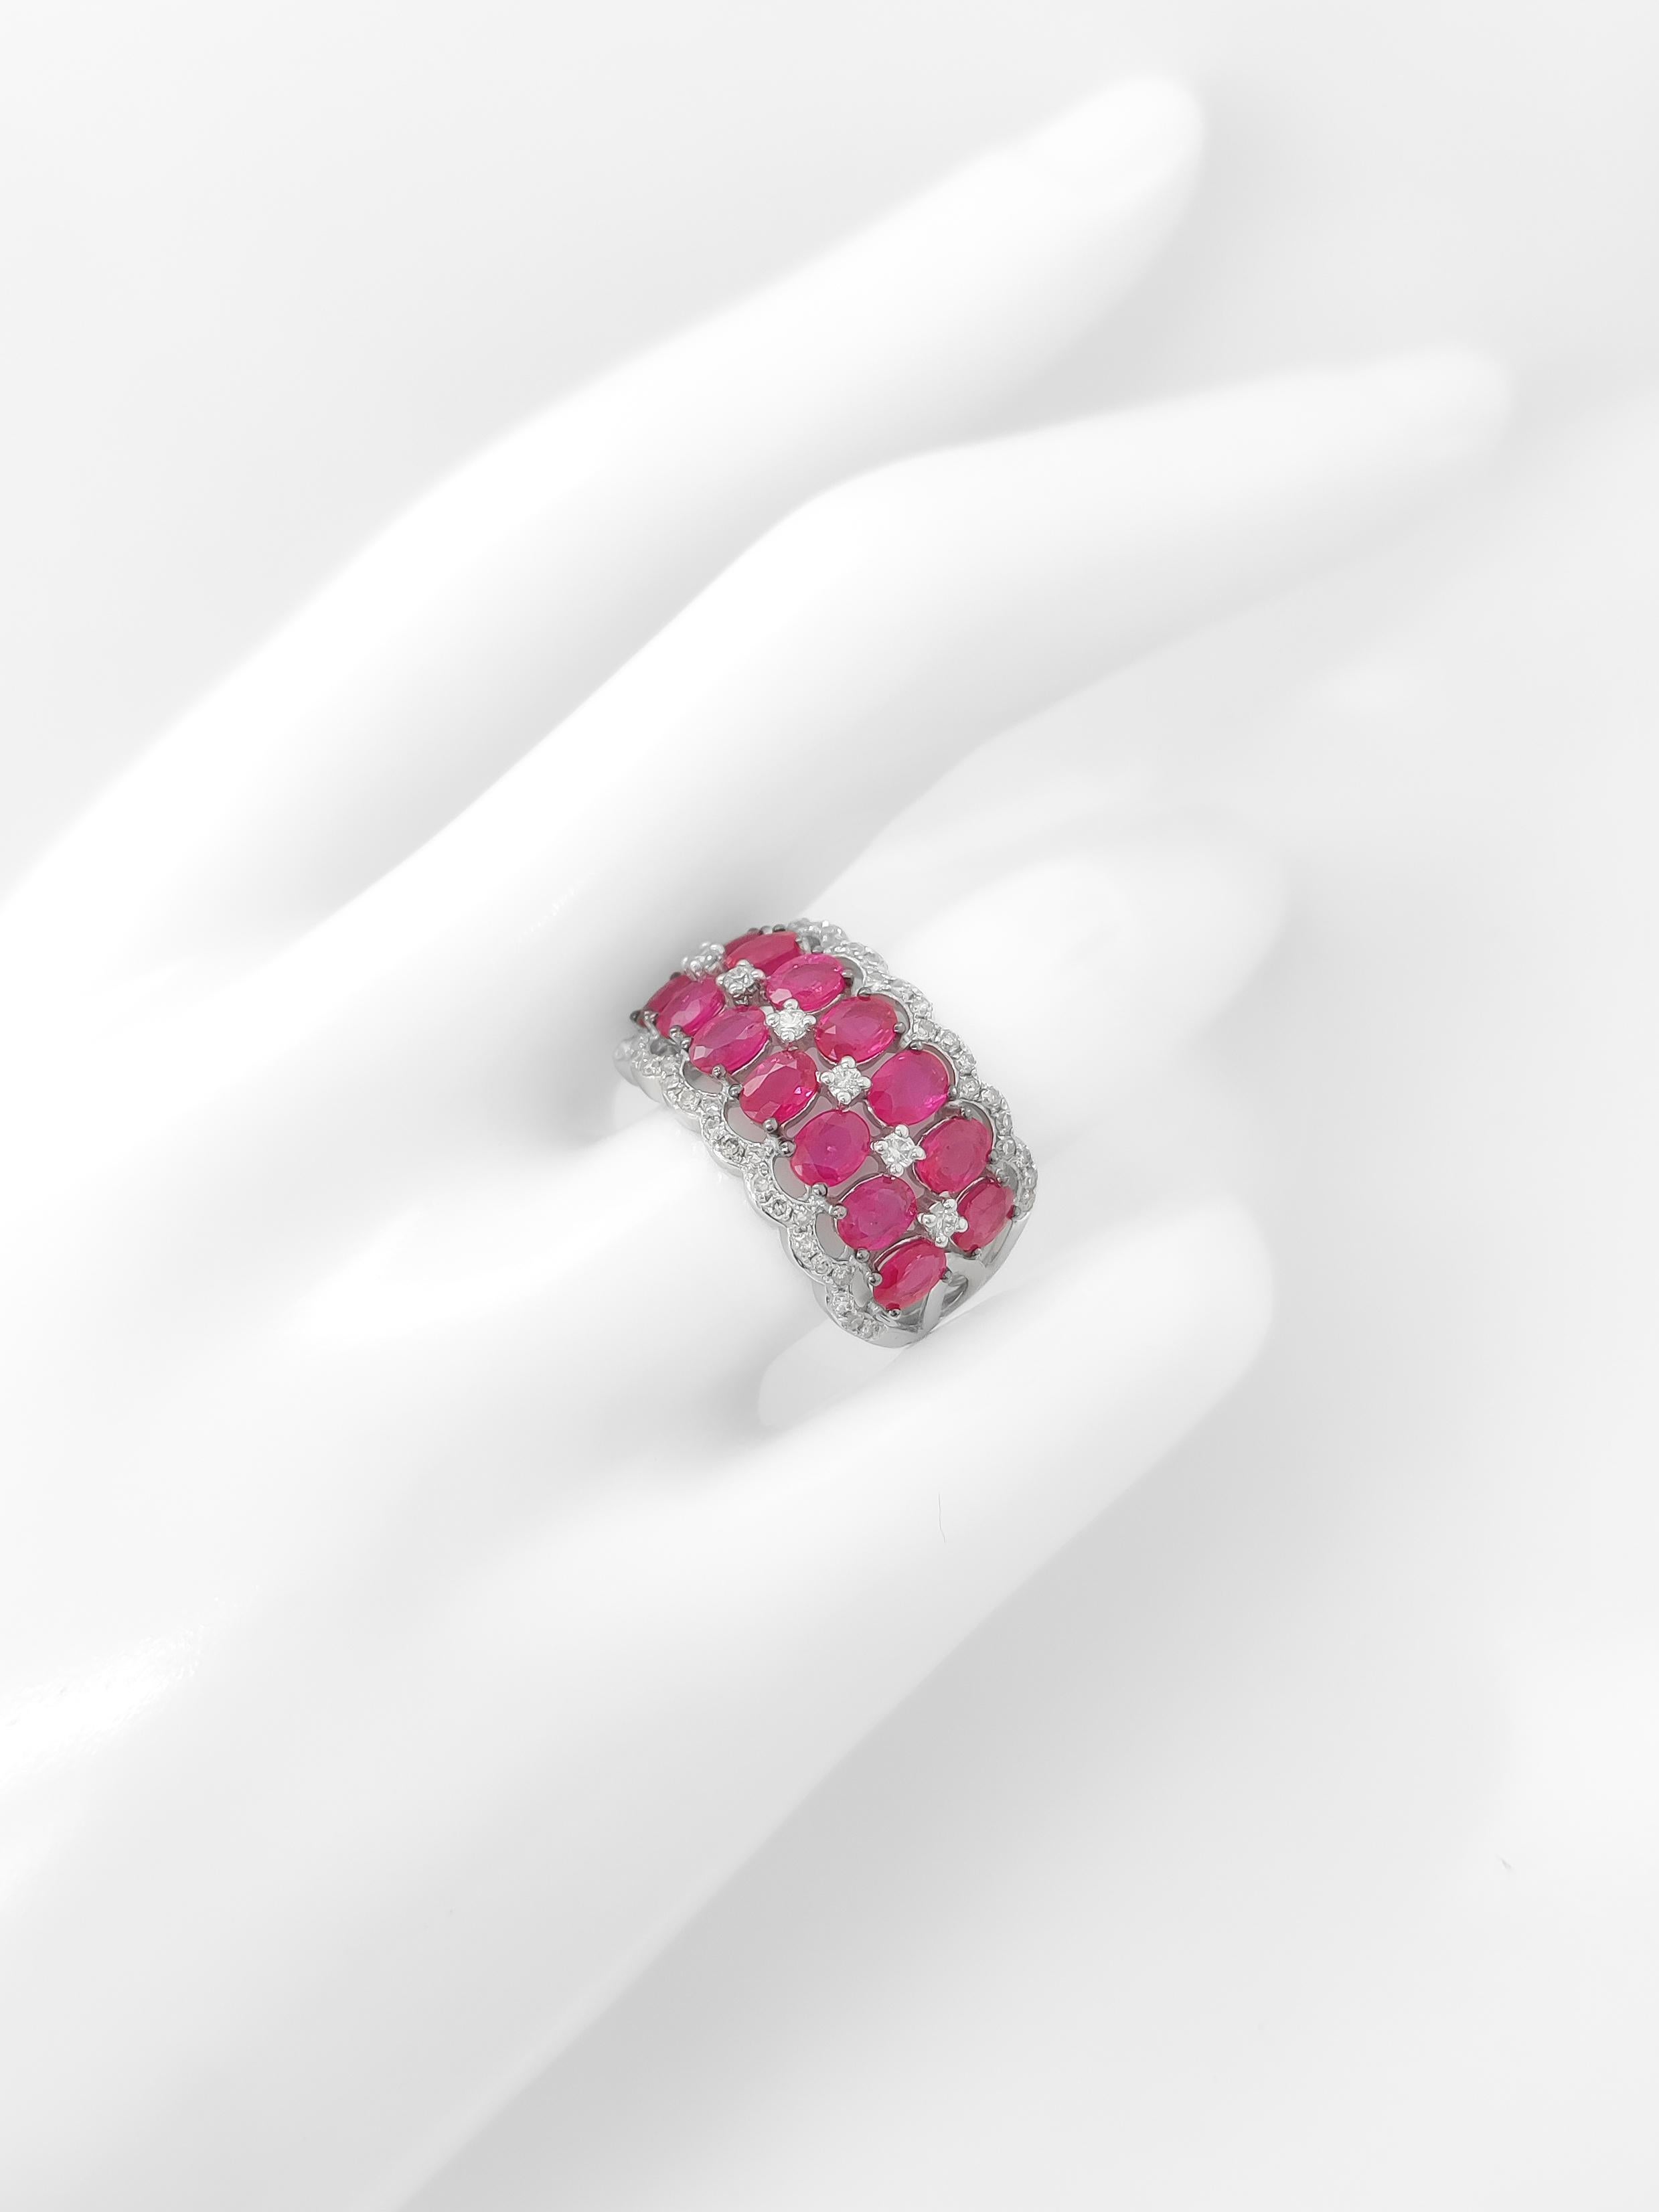 NO RESERVE 3.64CT Ruby & 0.47CT Diamond 14K White Gold Ring For Sale 3